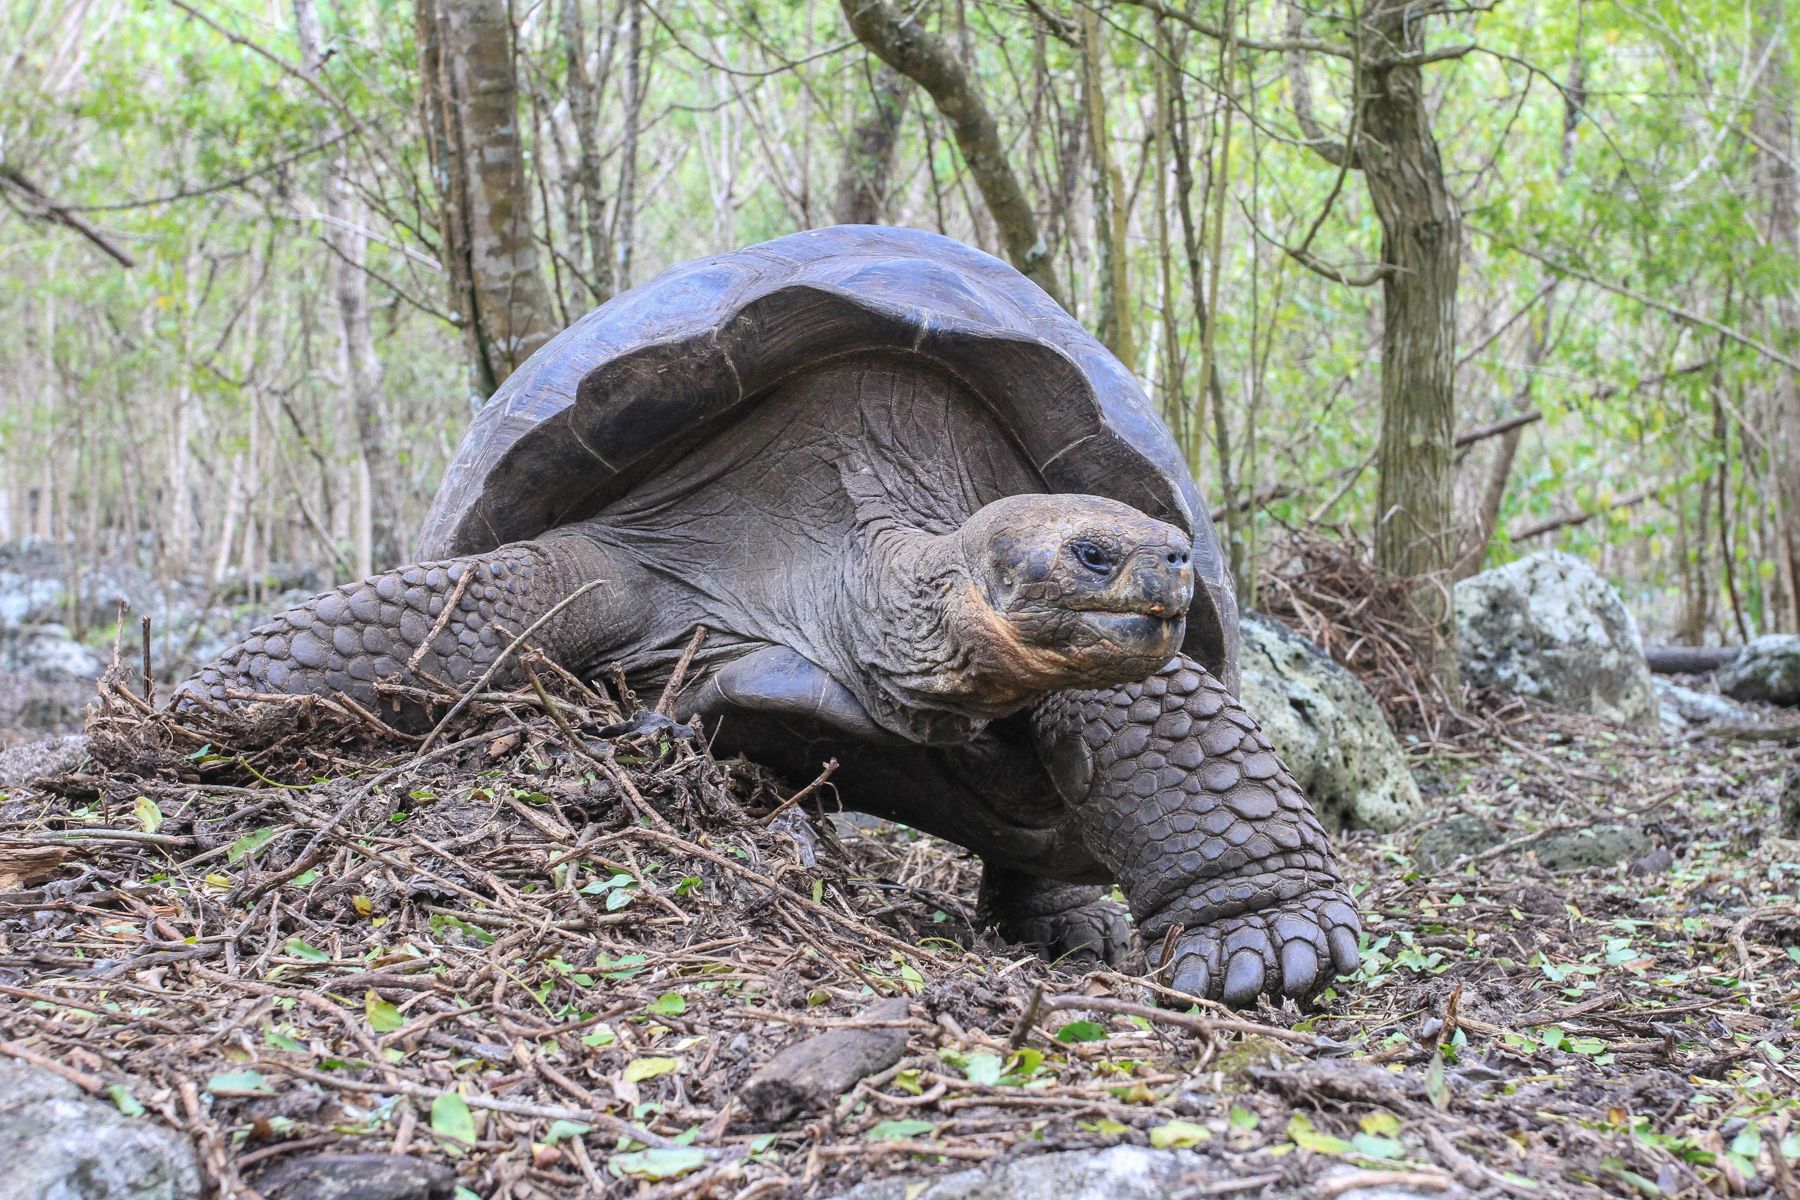 The Spanish name for the islands, Galápagos, means riding saddle and probably derived from the appearance of some of the endemic Giant Tortoises